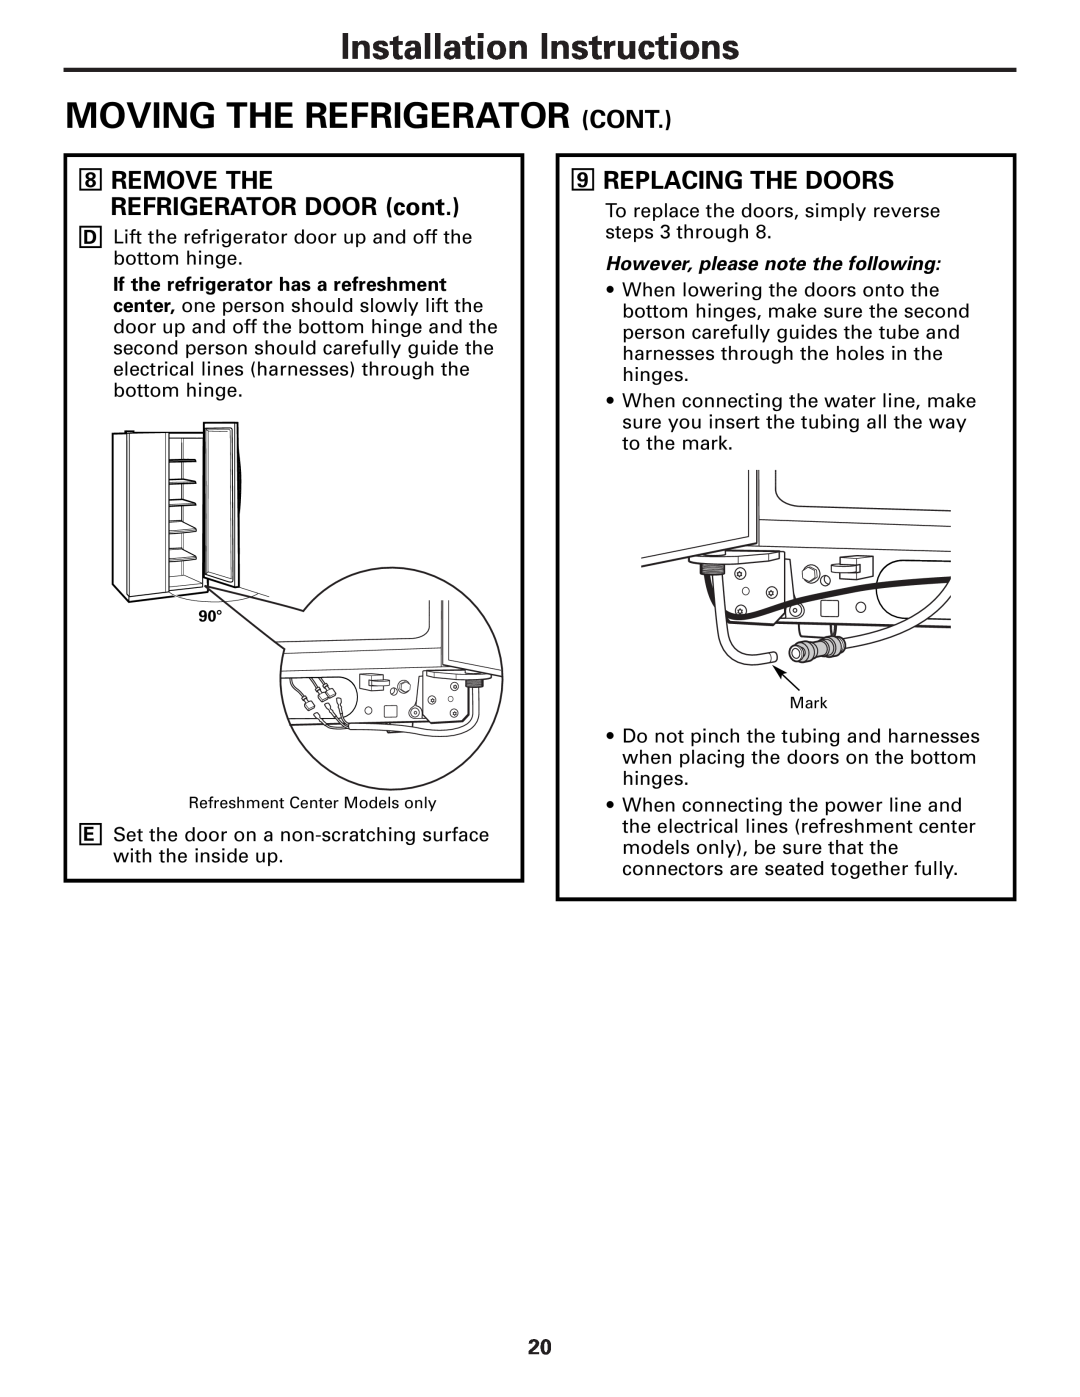 GE 25 and 27 9REPLACING THE DOORS, 8REMOVE THE REFRIGERATOR DOOR cont, However, please note the following 